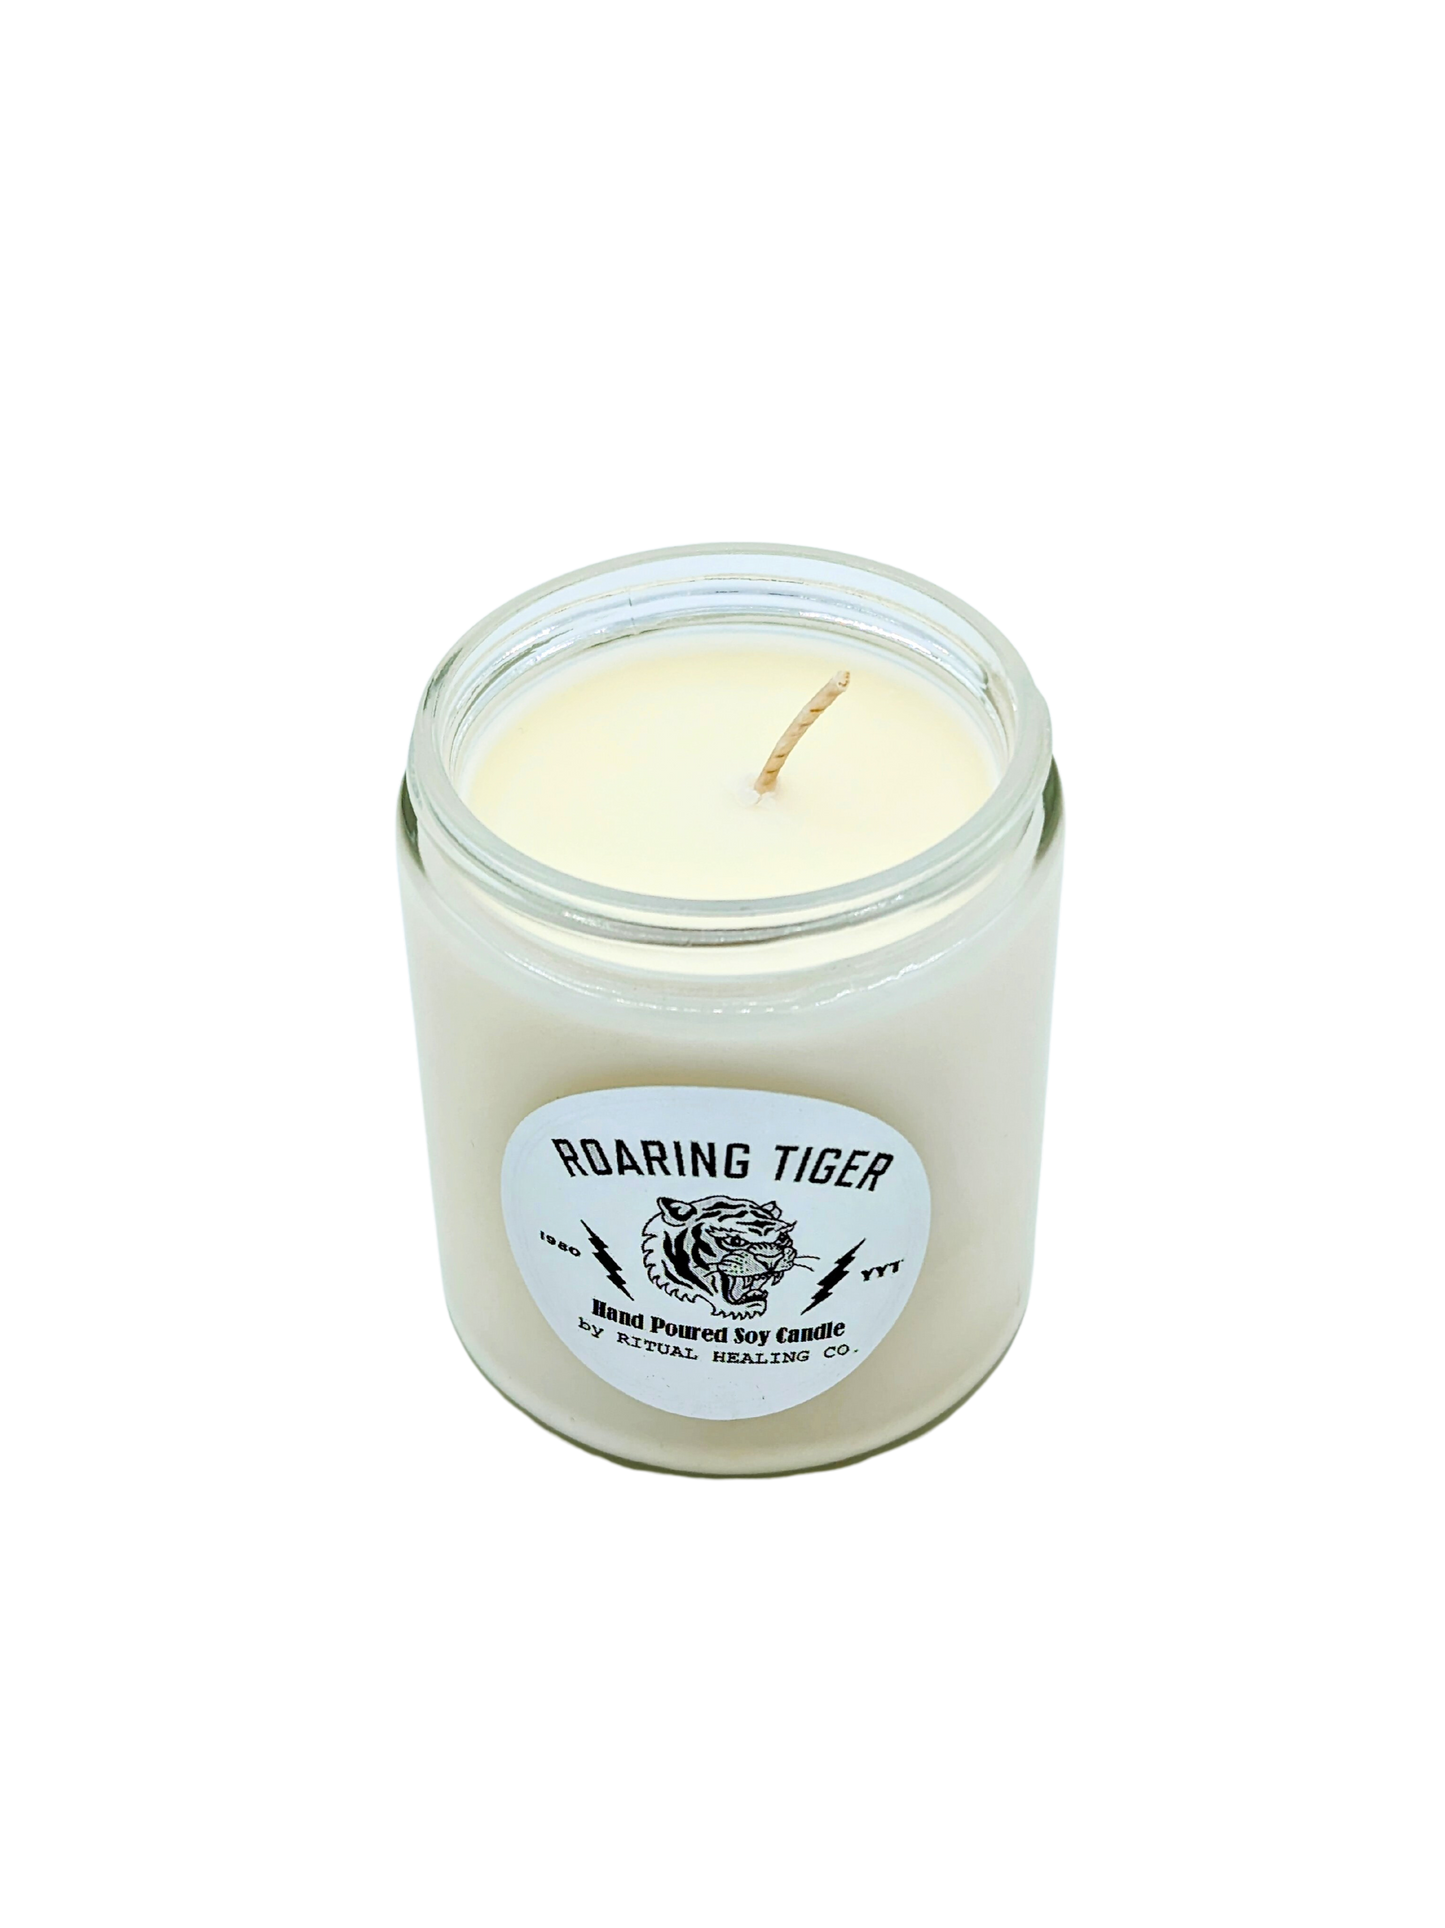 The Roaring Tiger Candle